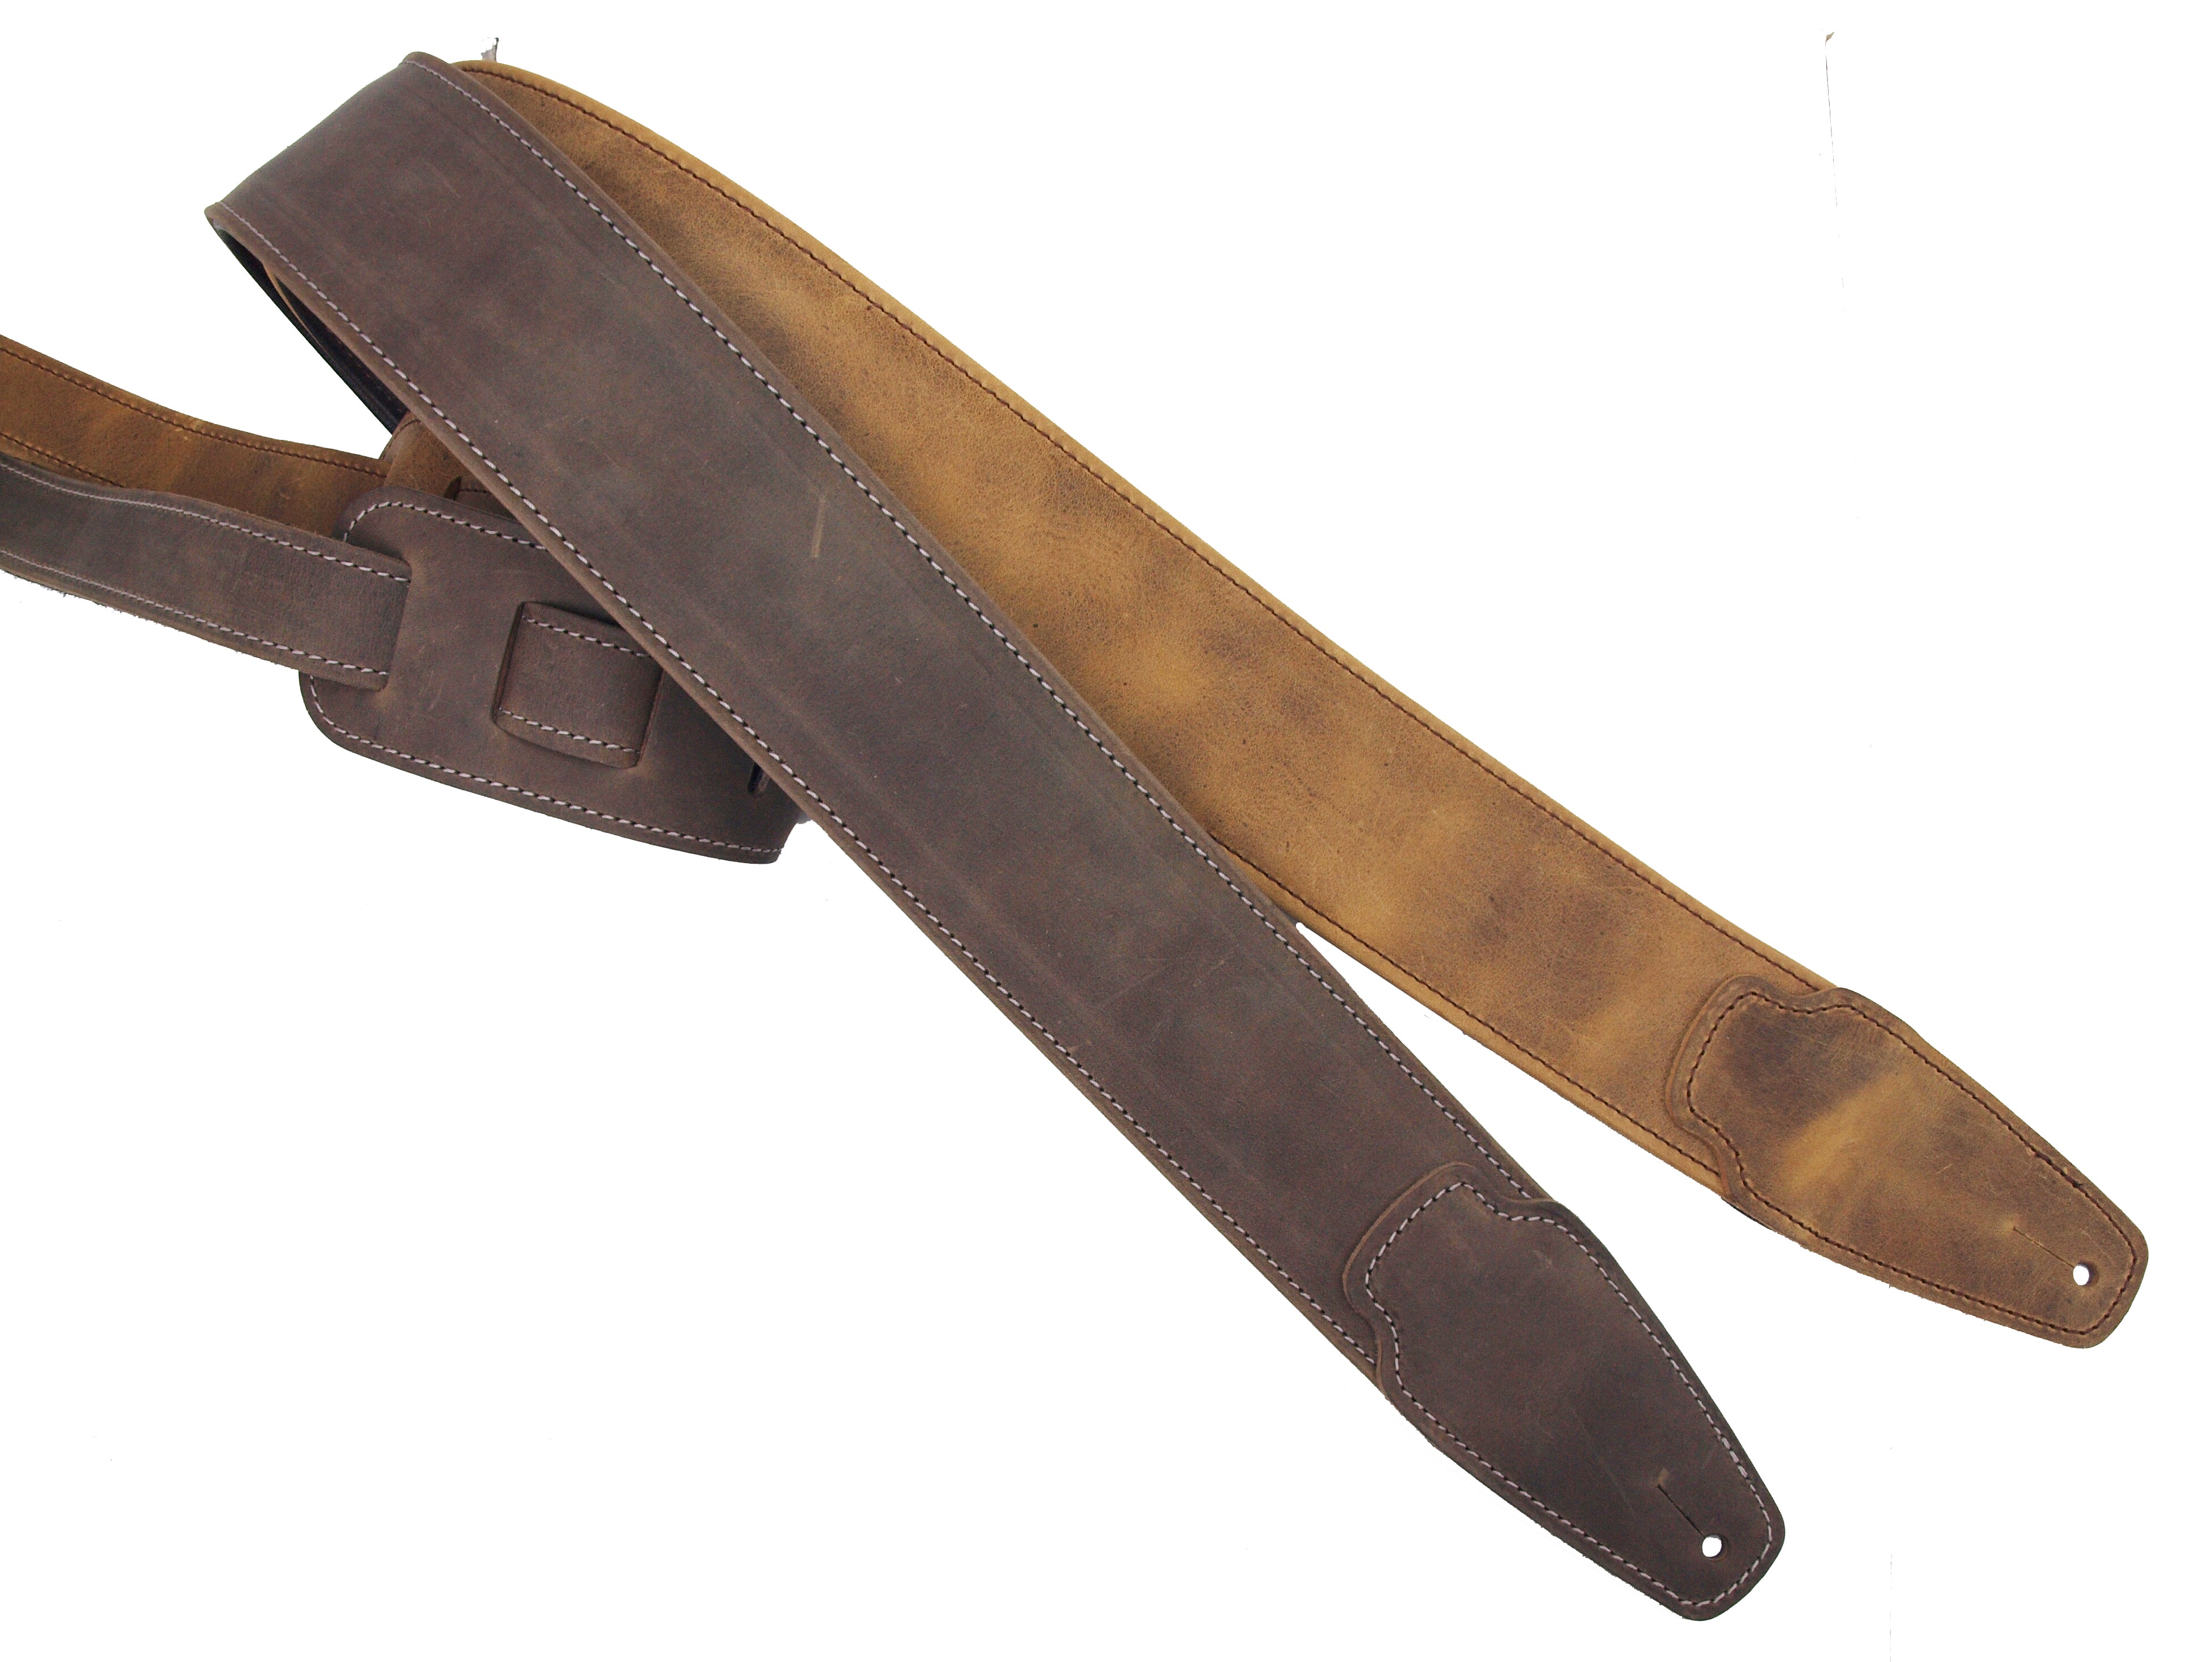 Distressed Leather Guitar Straps